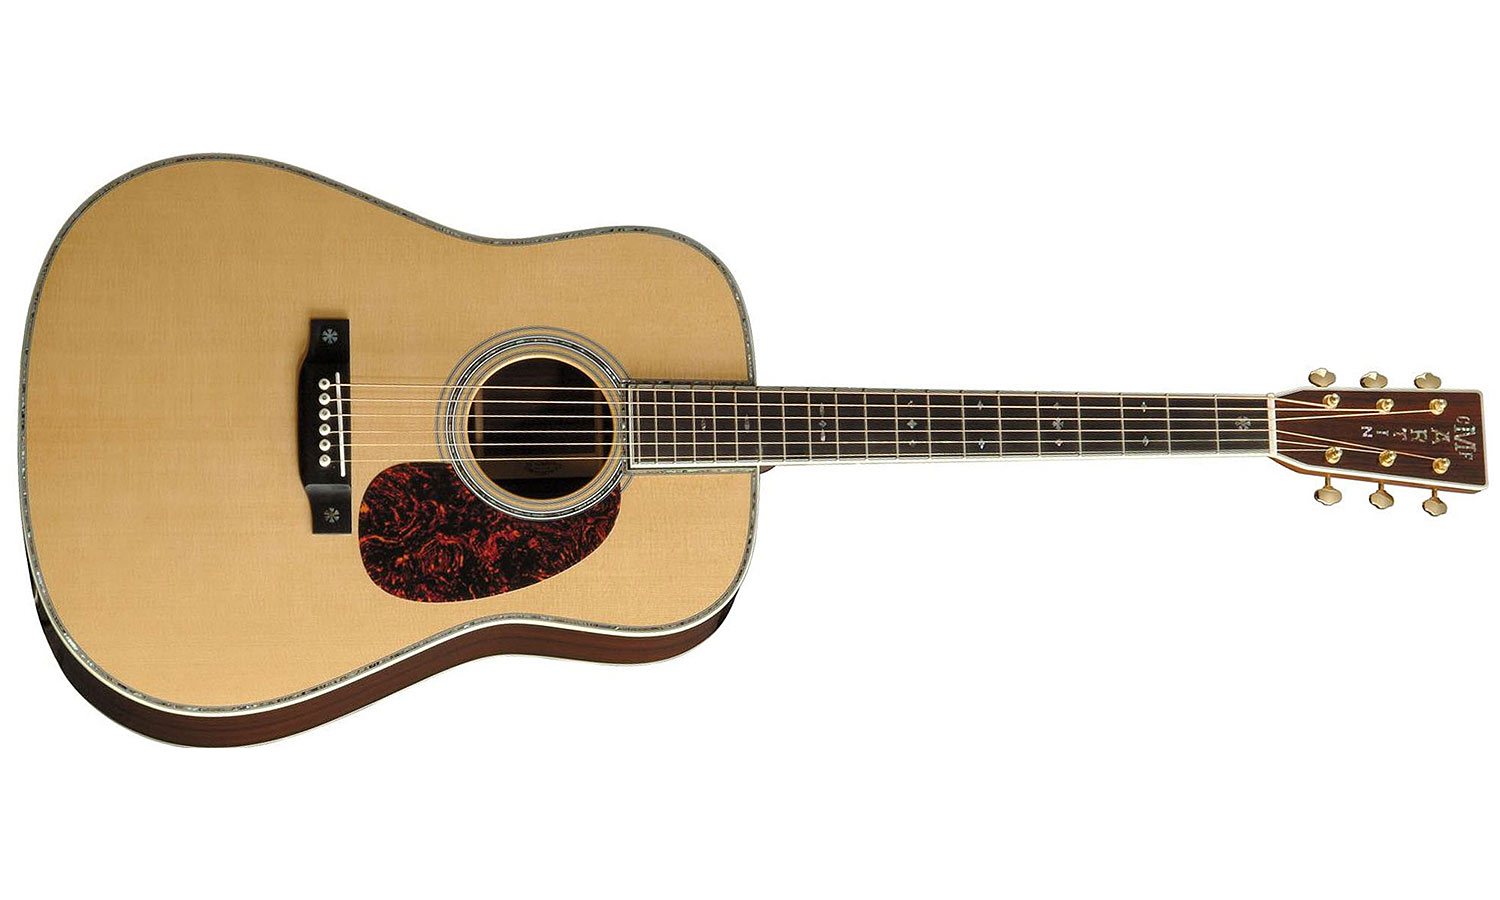 Martin D-42 Standard Re-imagined Dreadnought Epicea Palissandre Eb - Natural Aging Toner - Acoustic guitar & electro - Variation 1